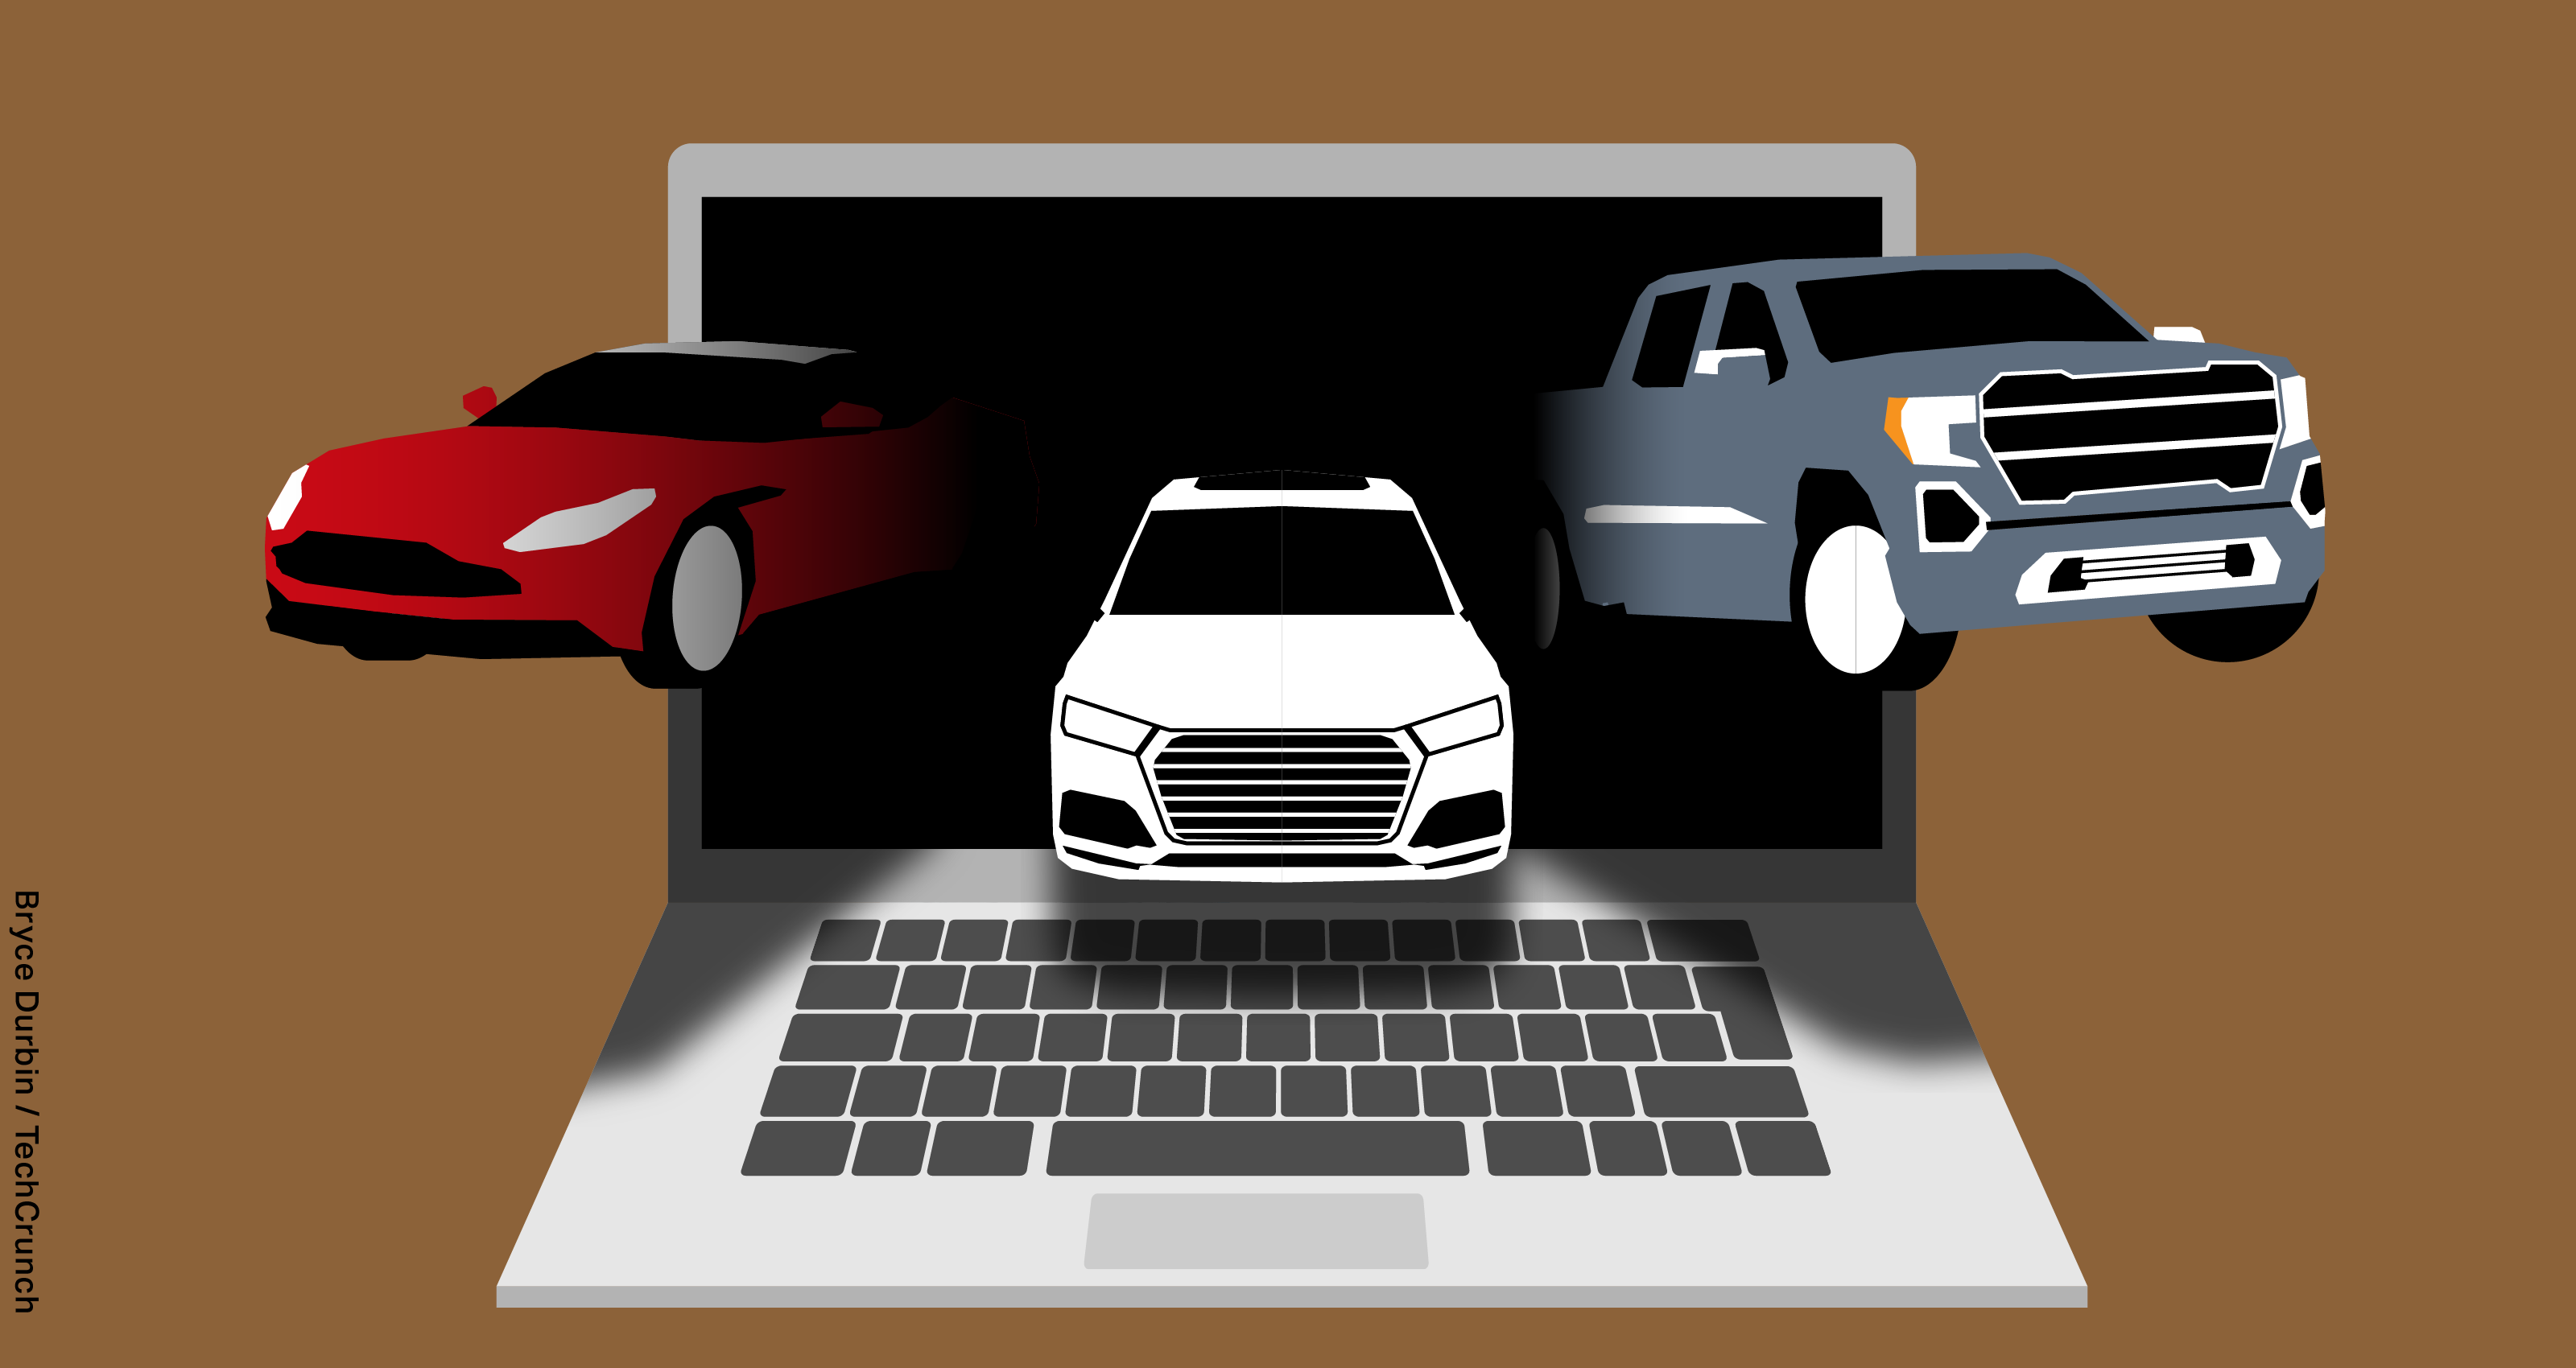 The future of car ownership: Building an online dealership